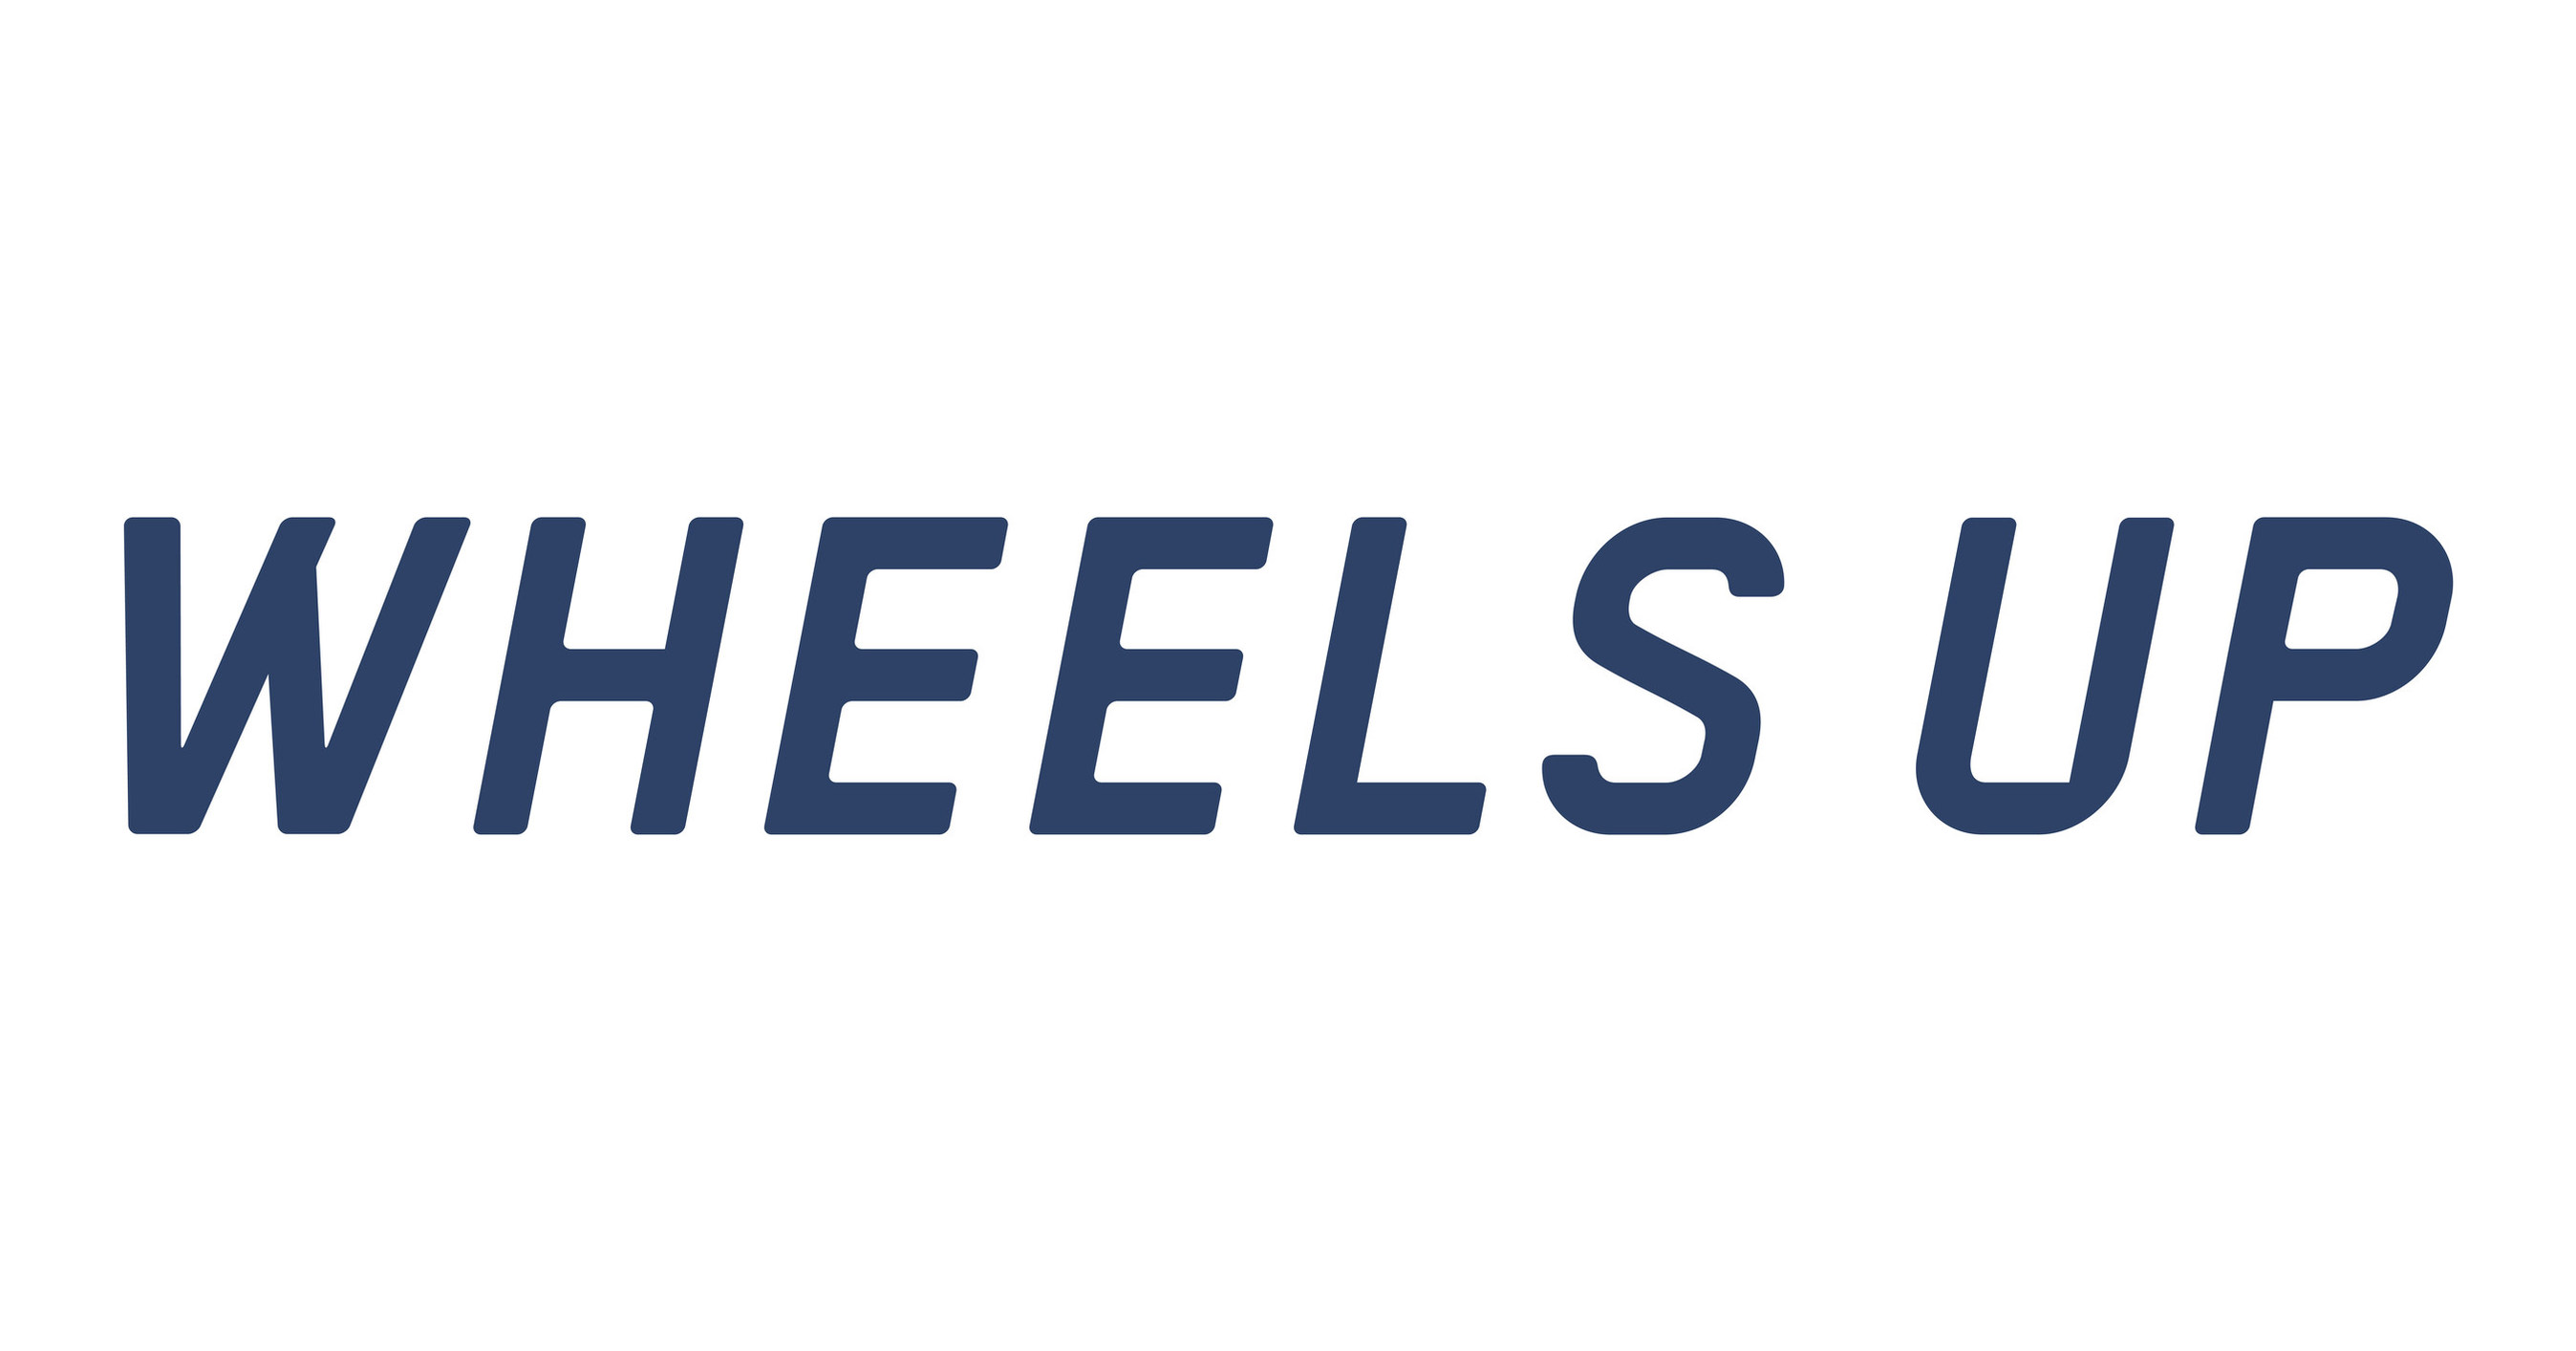 Wheels Up Announces Record Revenue Growth of 113% for Second Quarter 2021